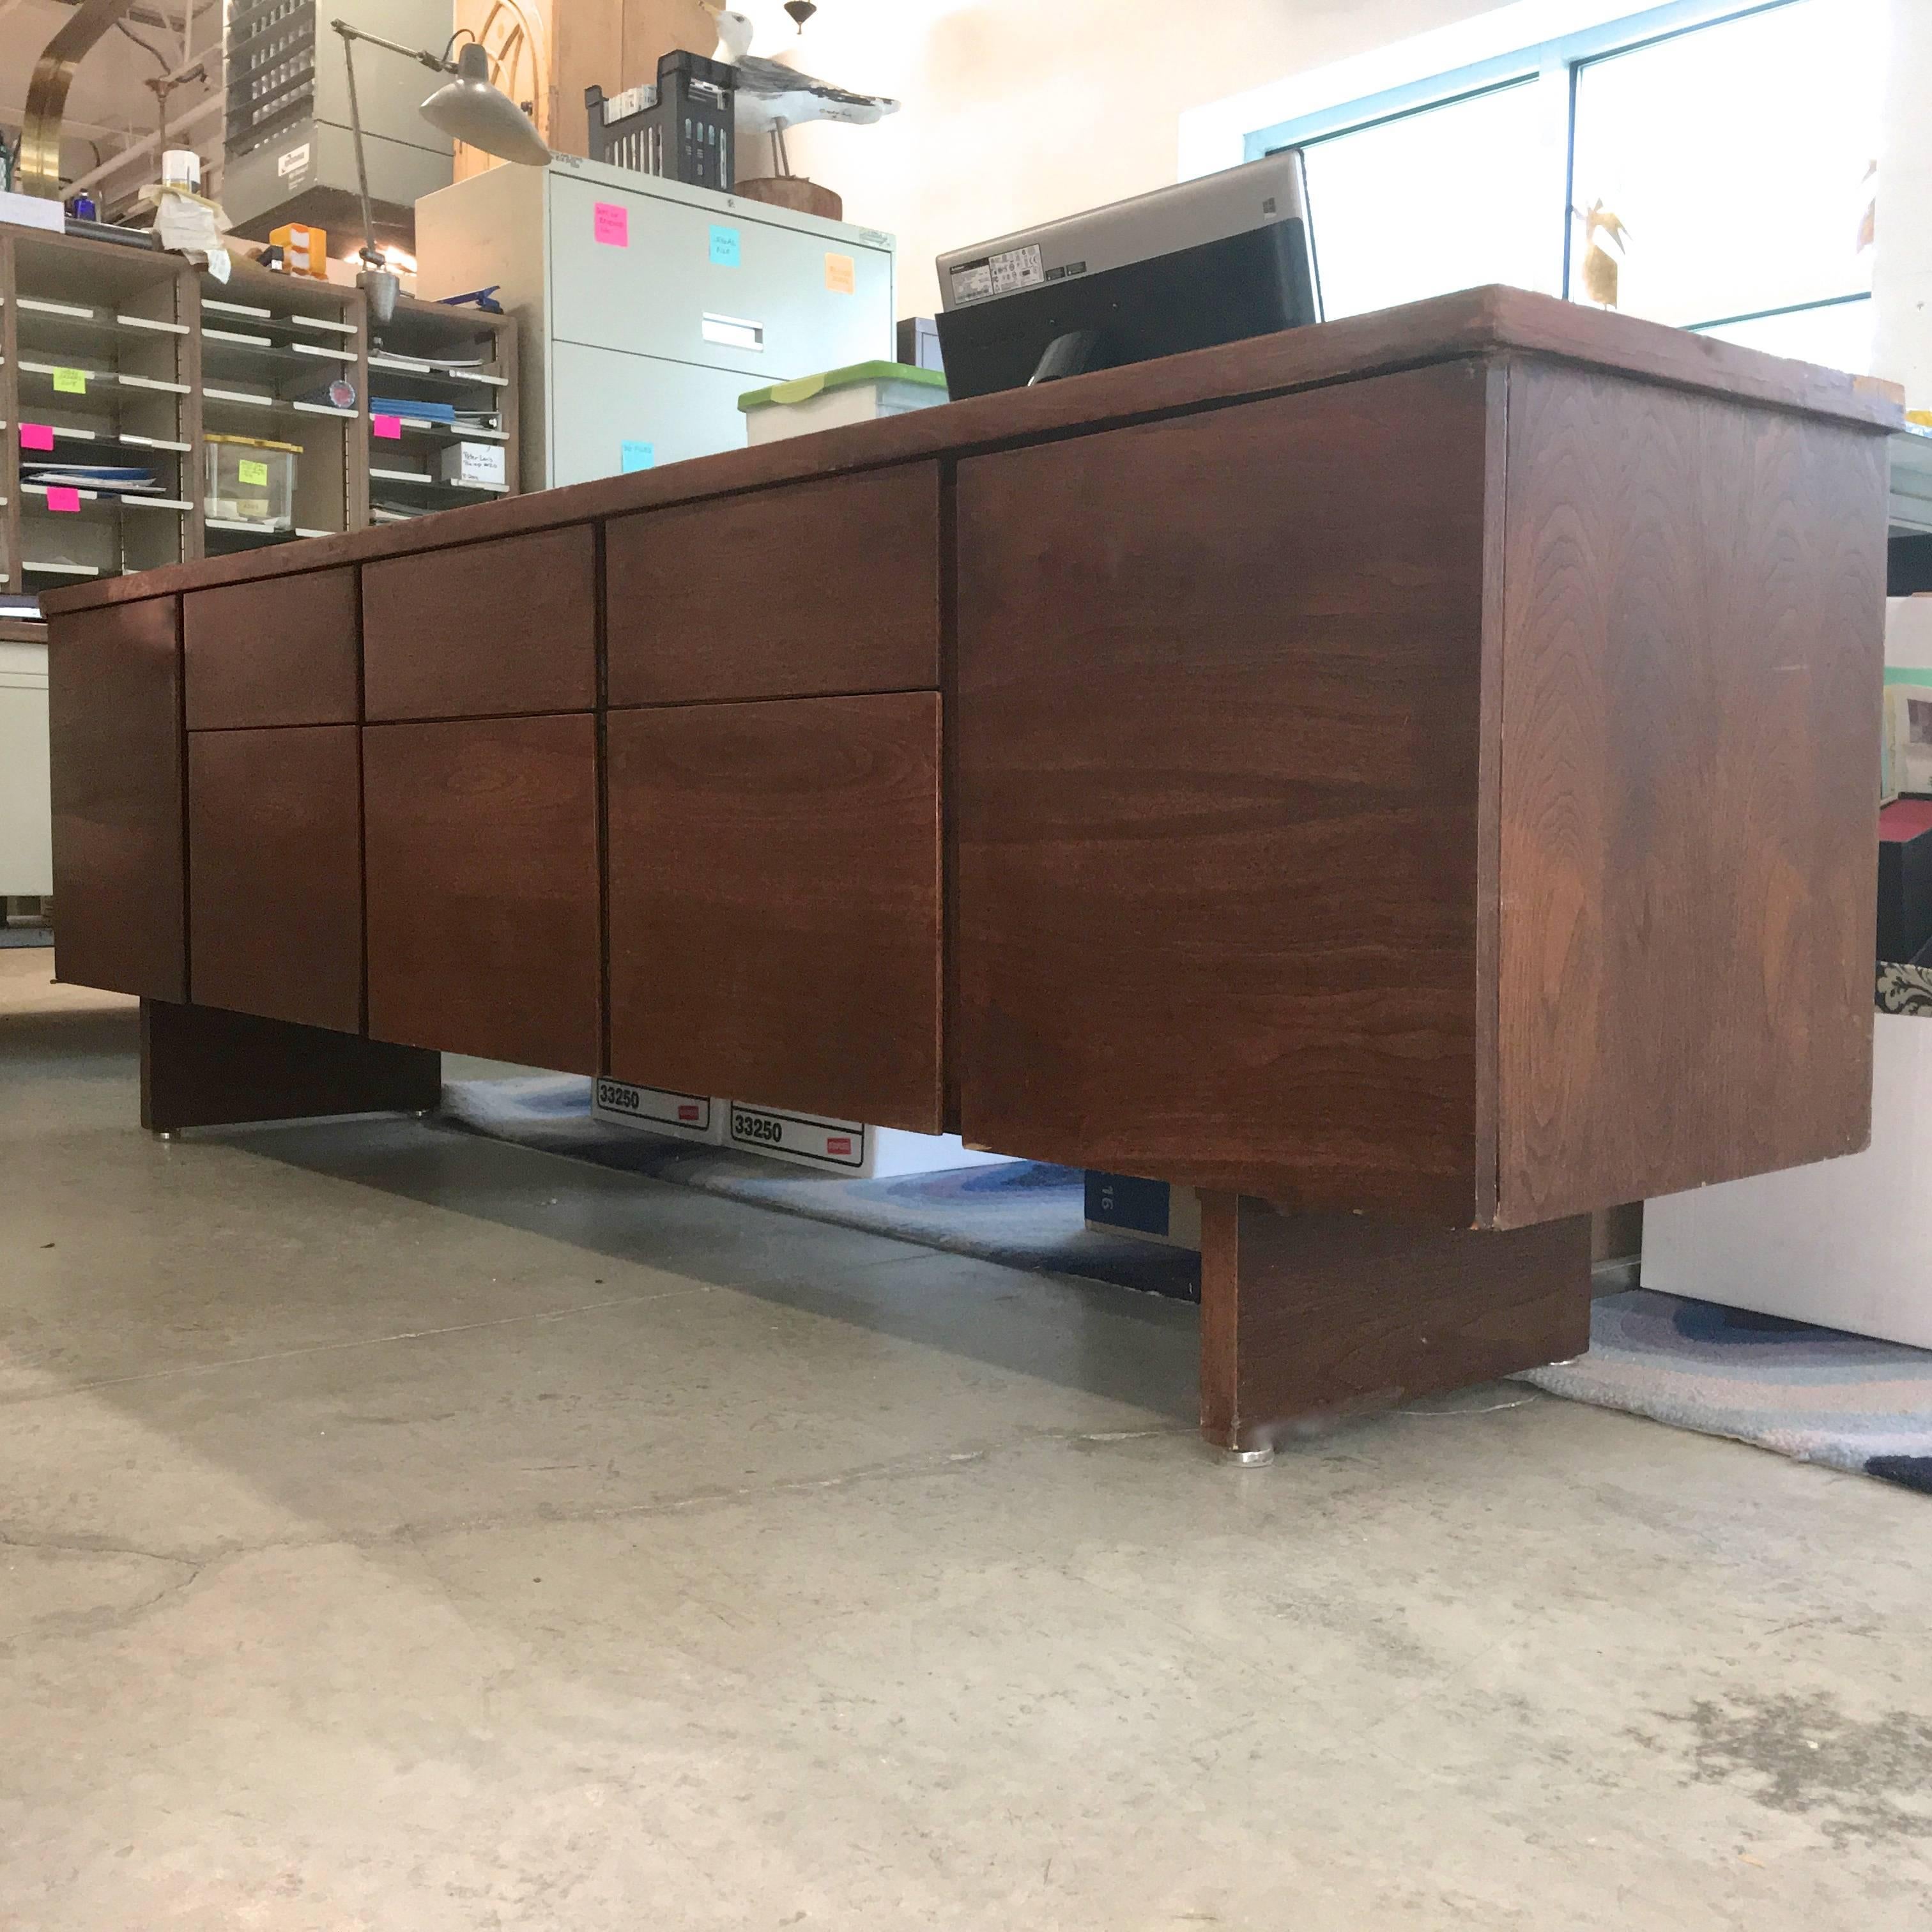 Rarely seen credenza by Harvey Probber of Fall River, MA. Long dark walnut case on two slab legs. Two doors reveal open cabinets on either end with a single adjustable shelf in each. In between the doors are three sets of drawers, shallow on top and